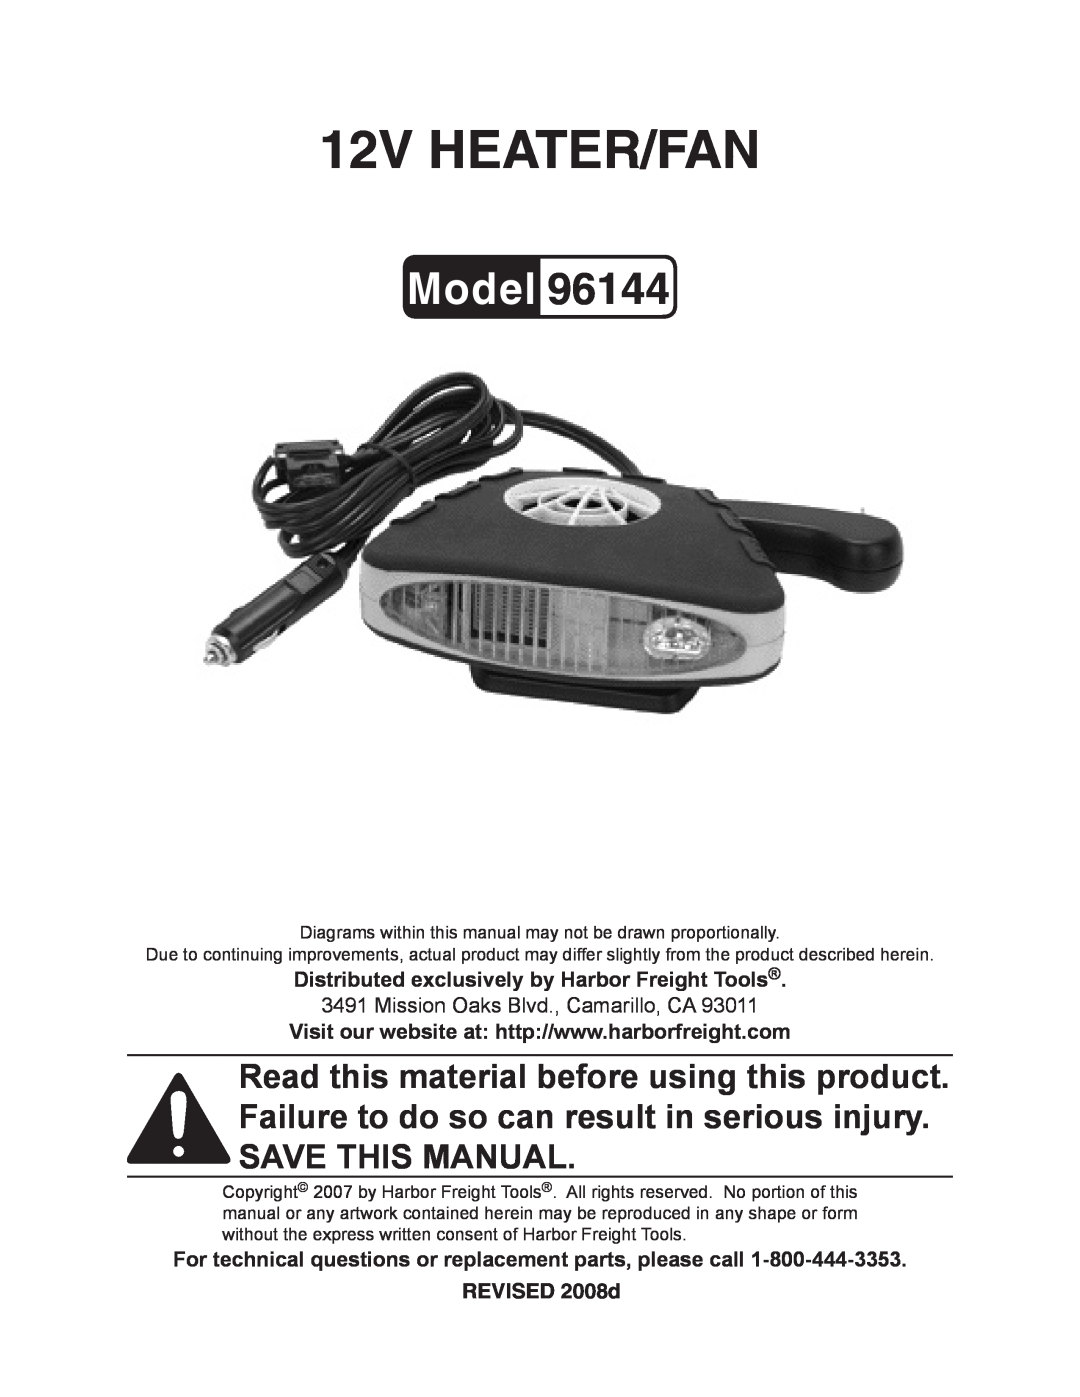 Harbor Freight Tools 96144 manual REVISED 2008d, 12V heater/fan, Model, Assembly And Operation Instructions 